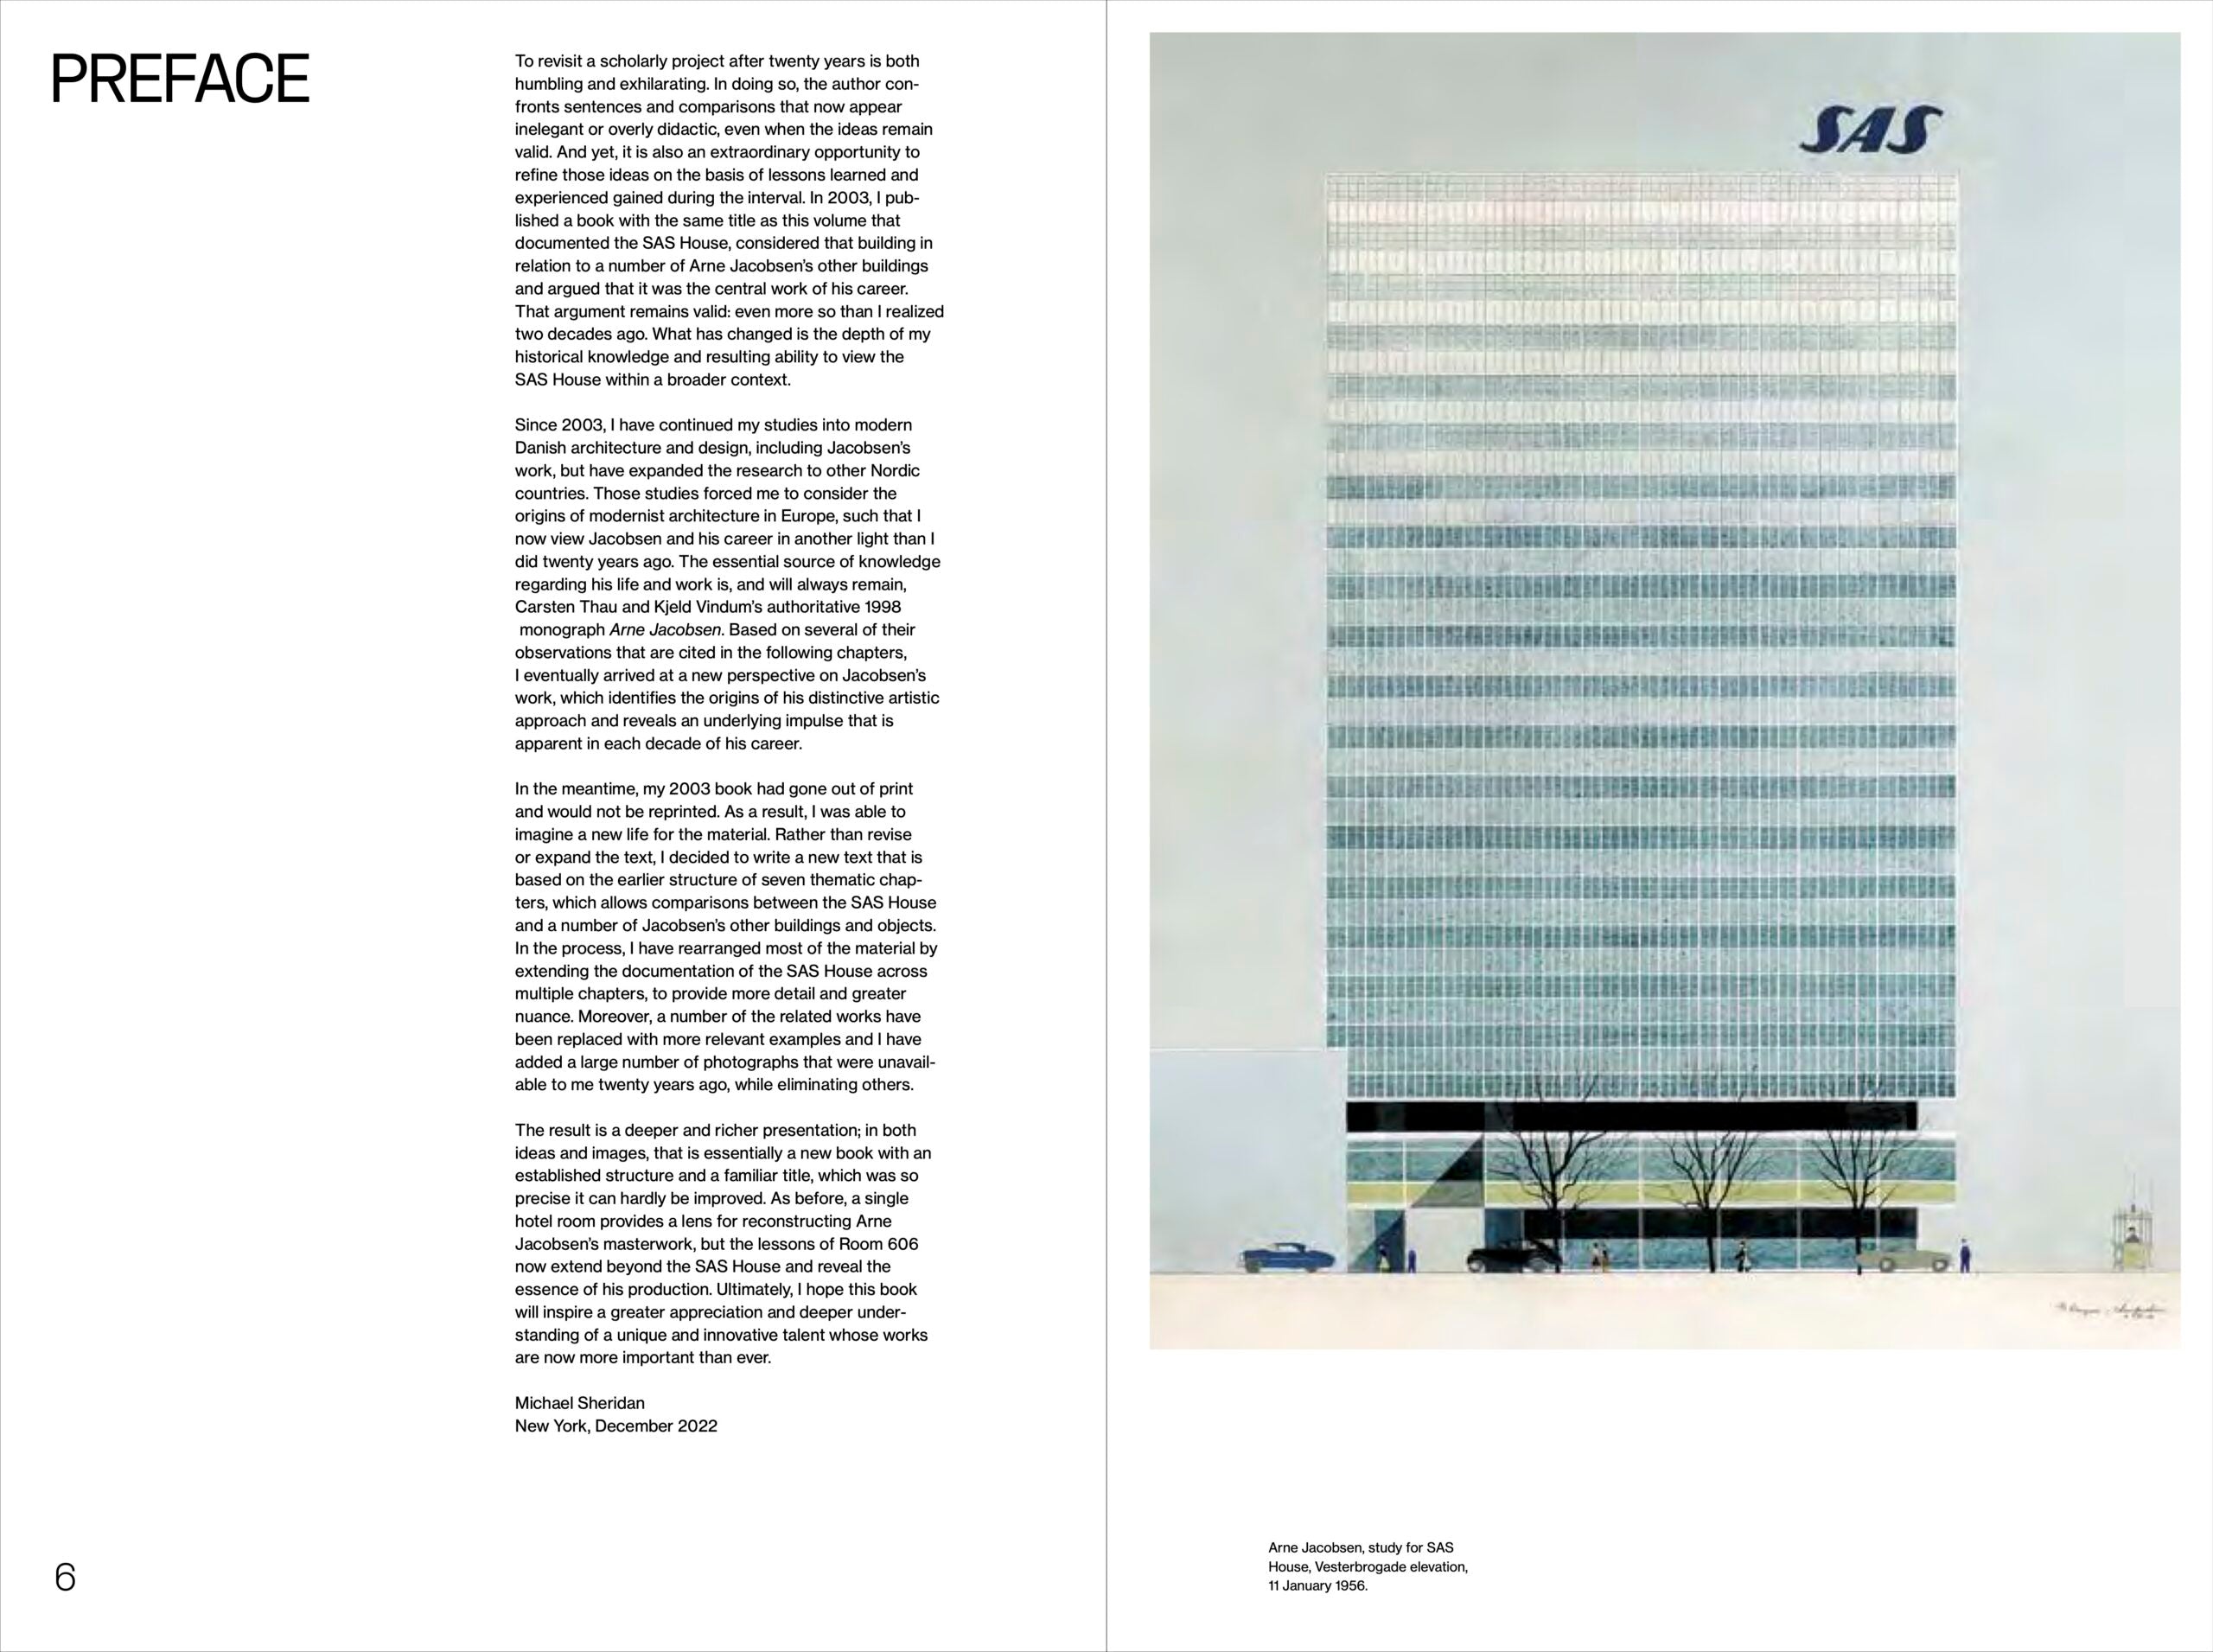 Room 606 – The SAS House and the Work of Arne Jacobsen